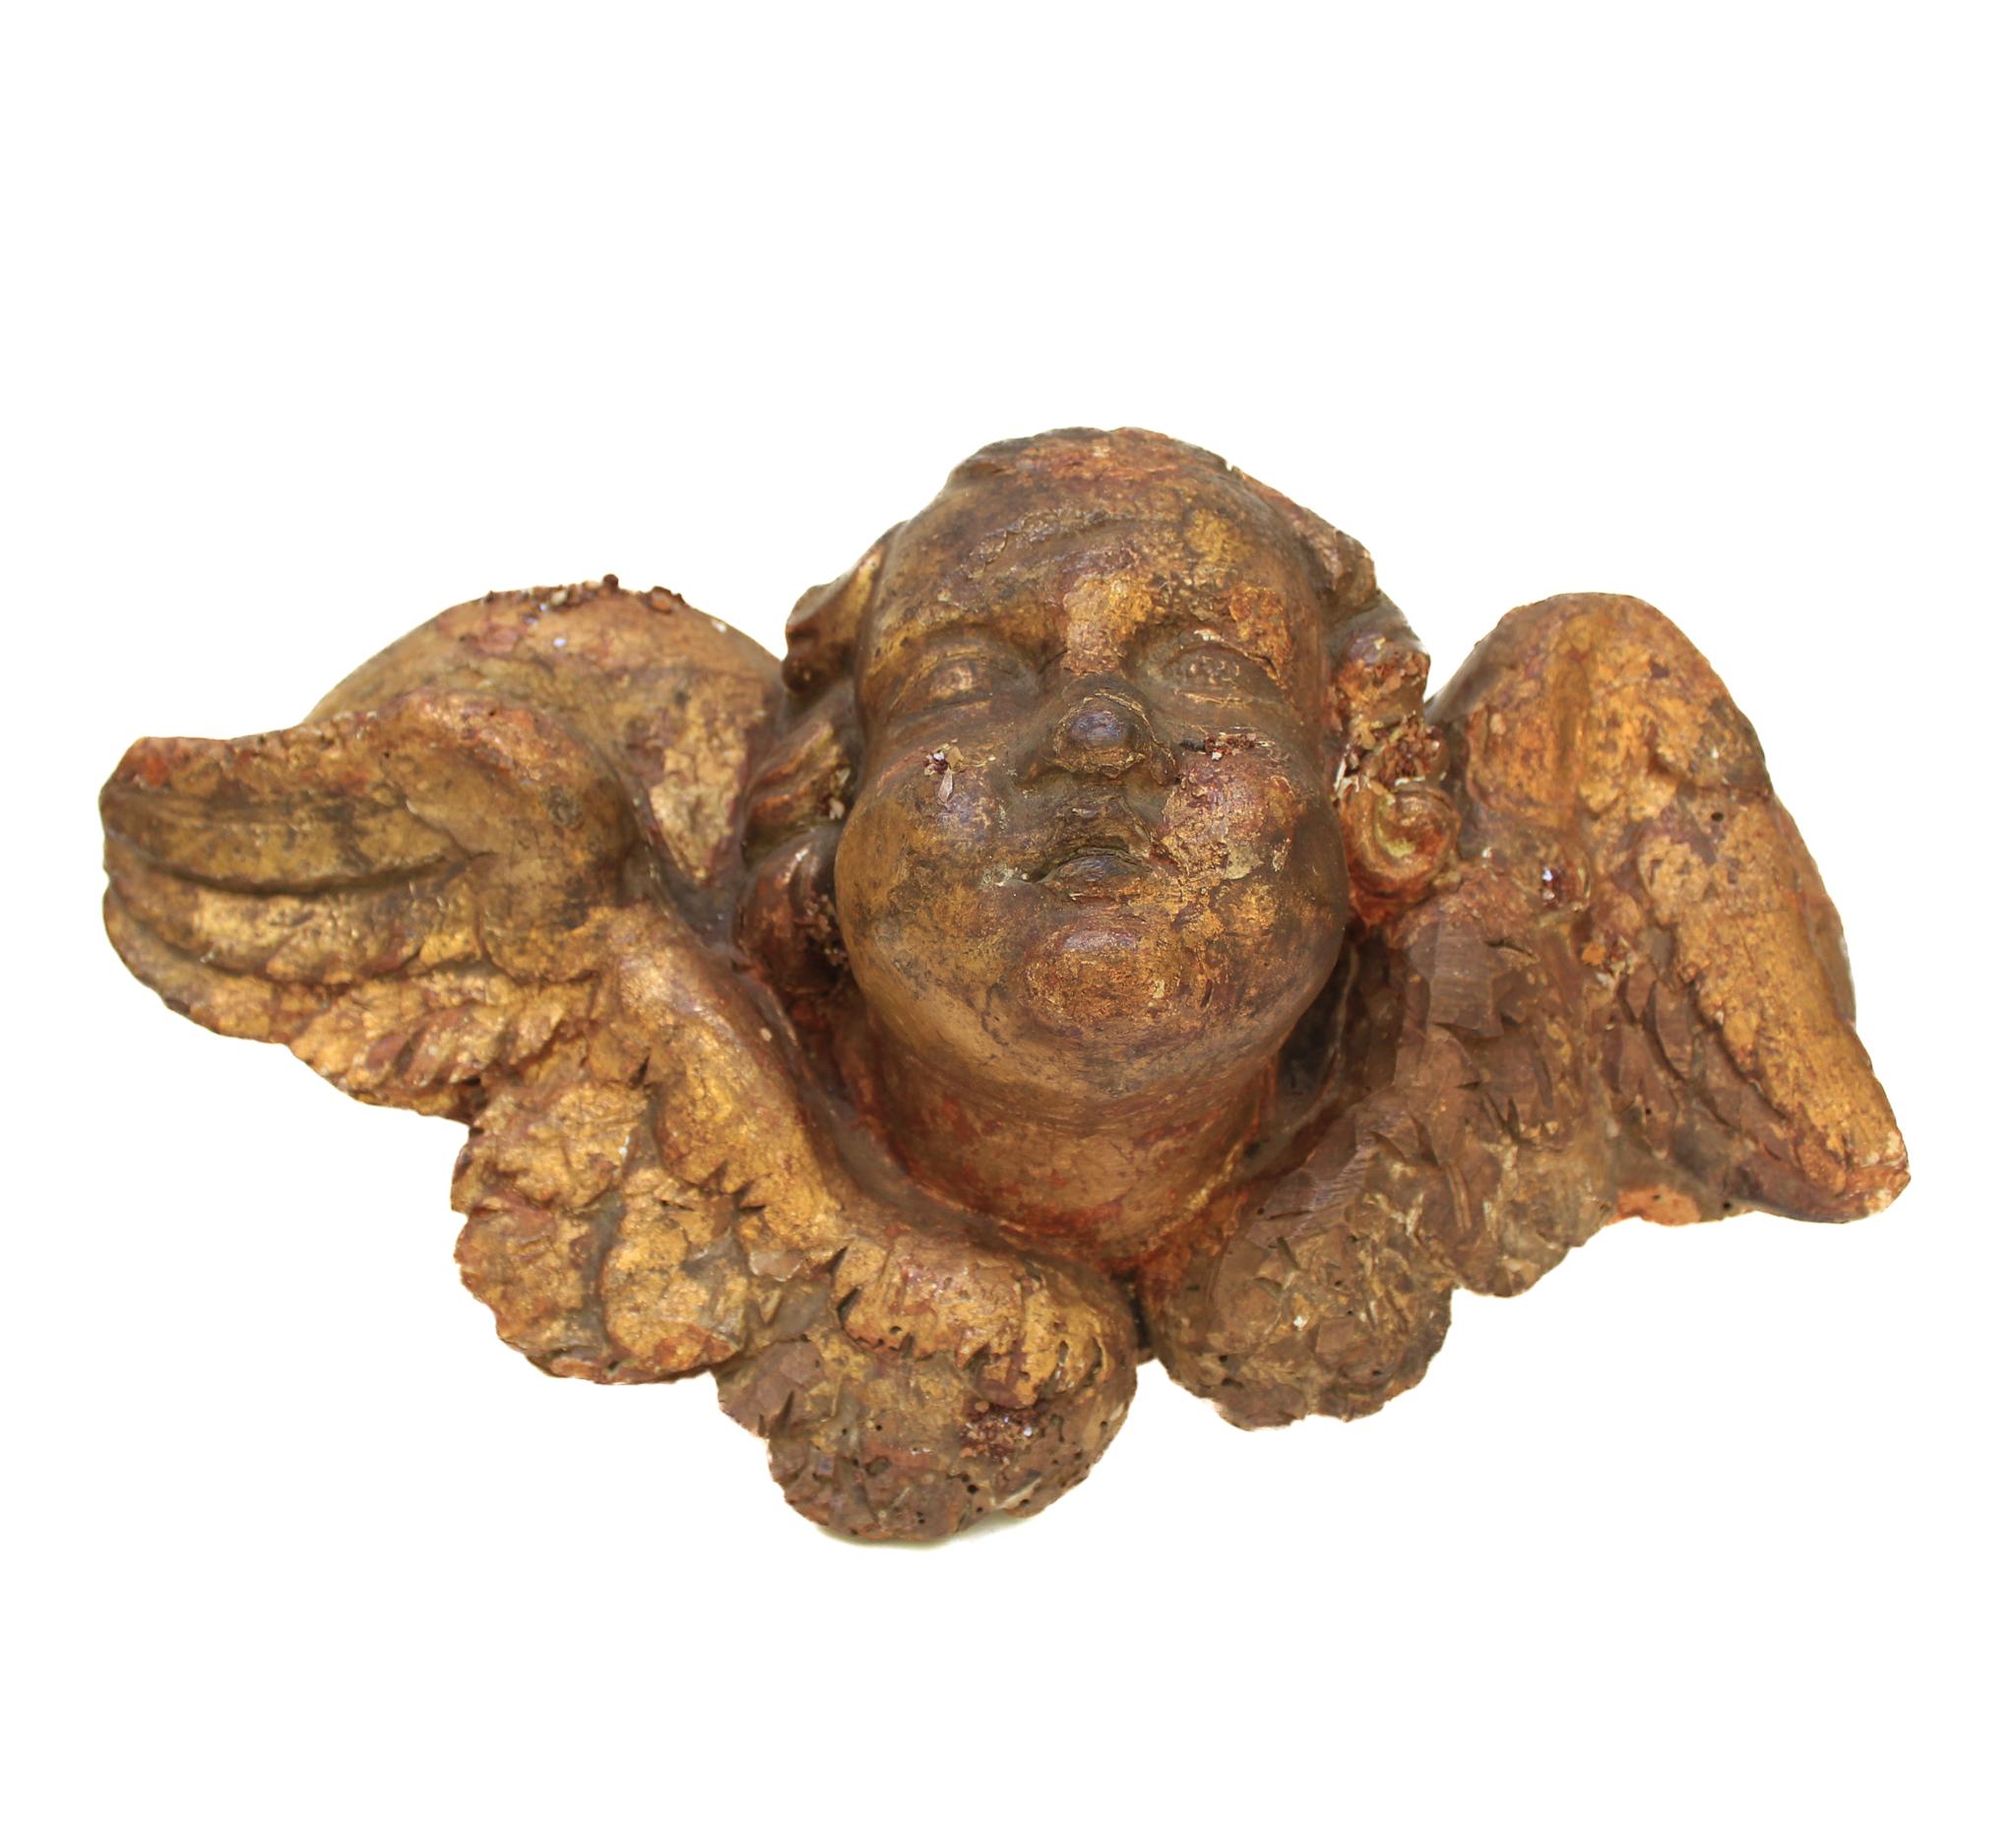 17th century Italian angel head (putto) with vanadinite crystals on a metal stand. It is adorned with the vanadinite crystals on different aspects of the piece.

A 